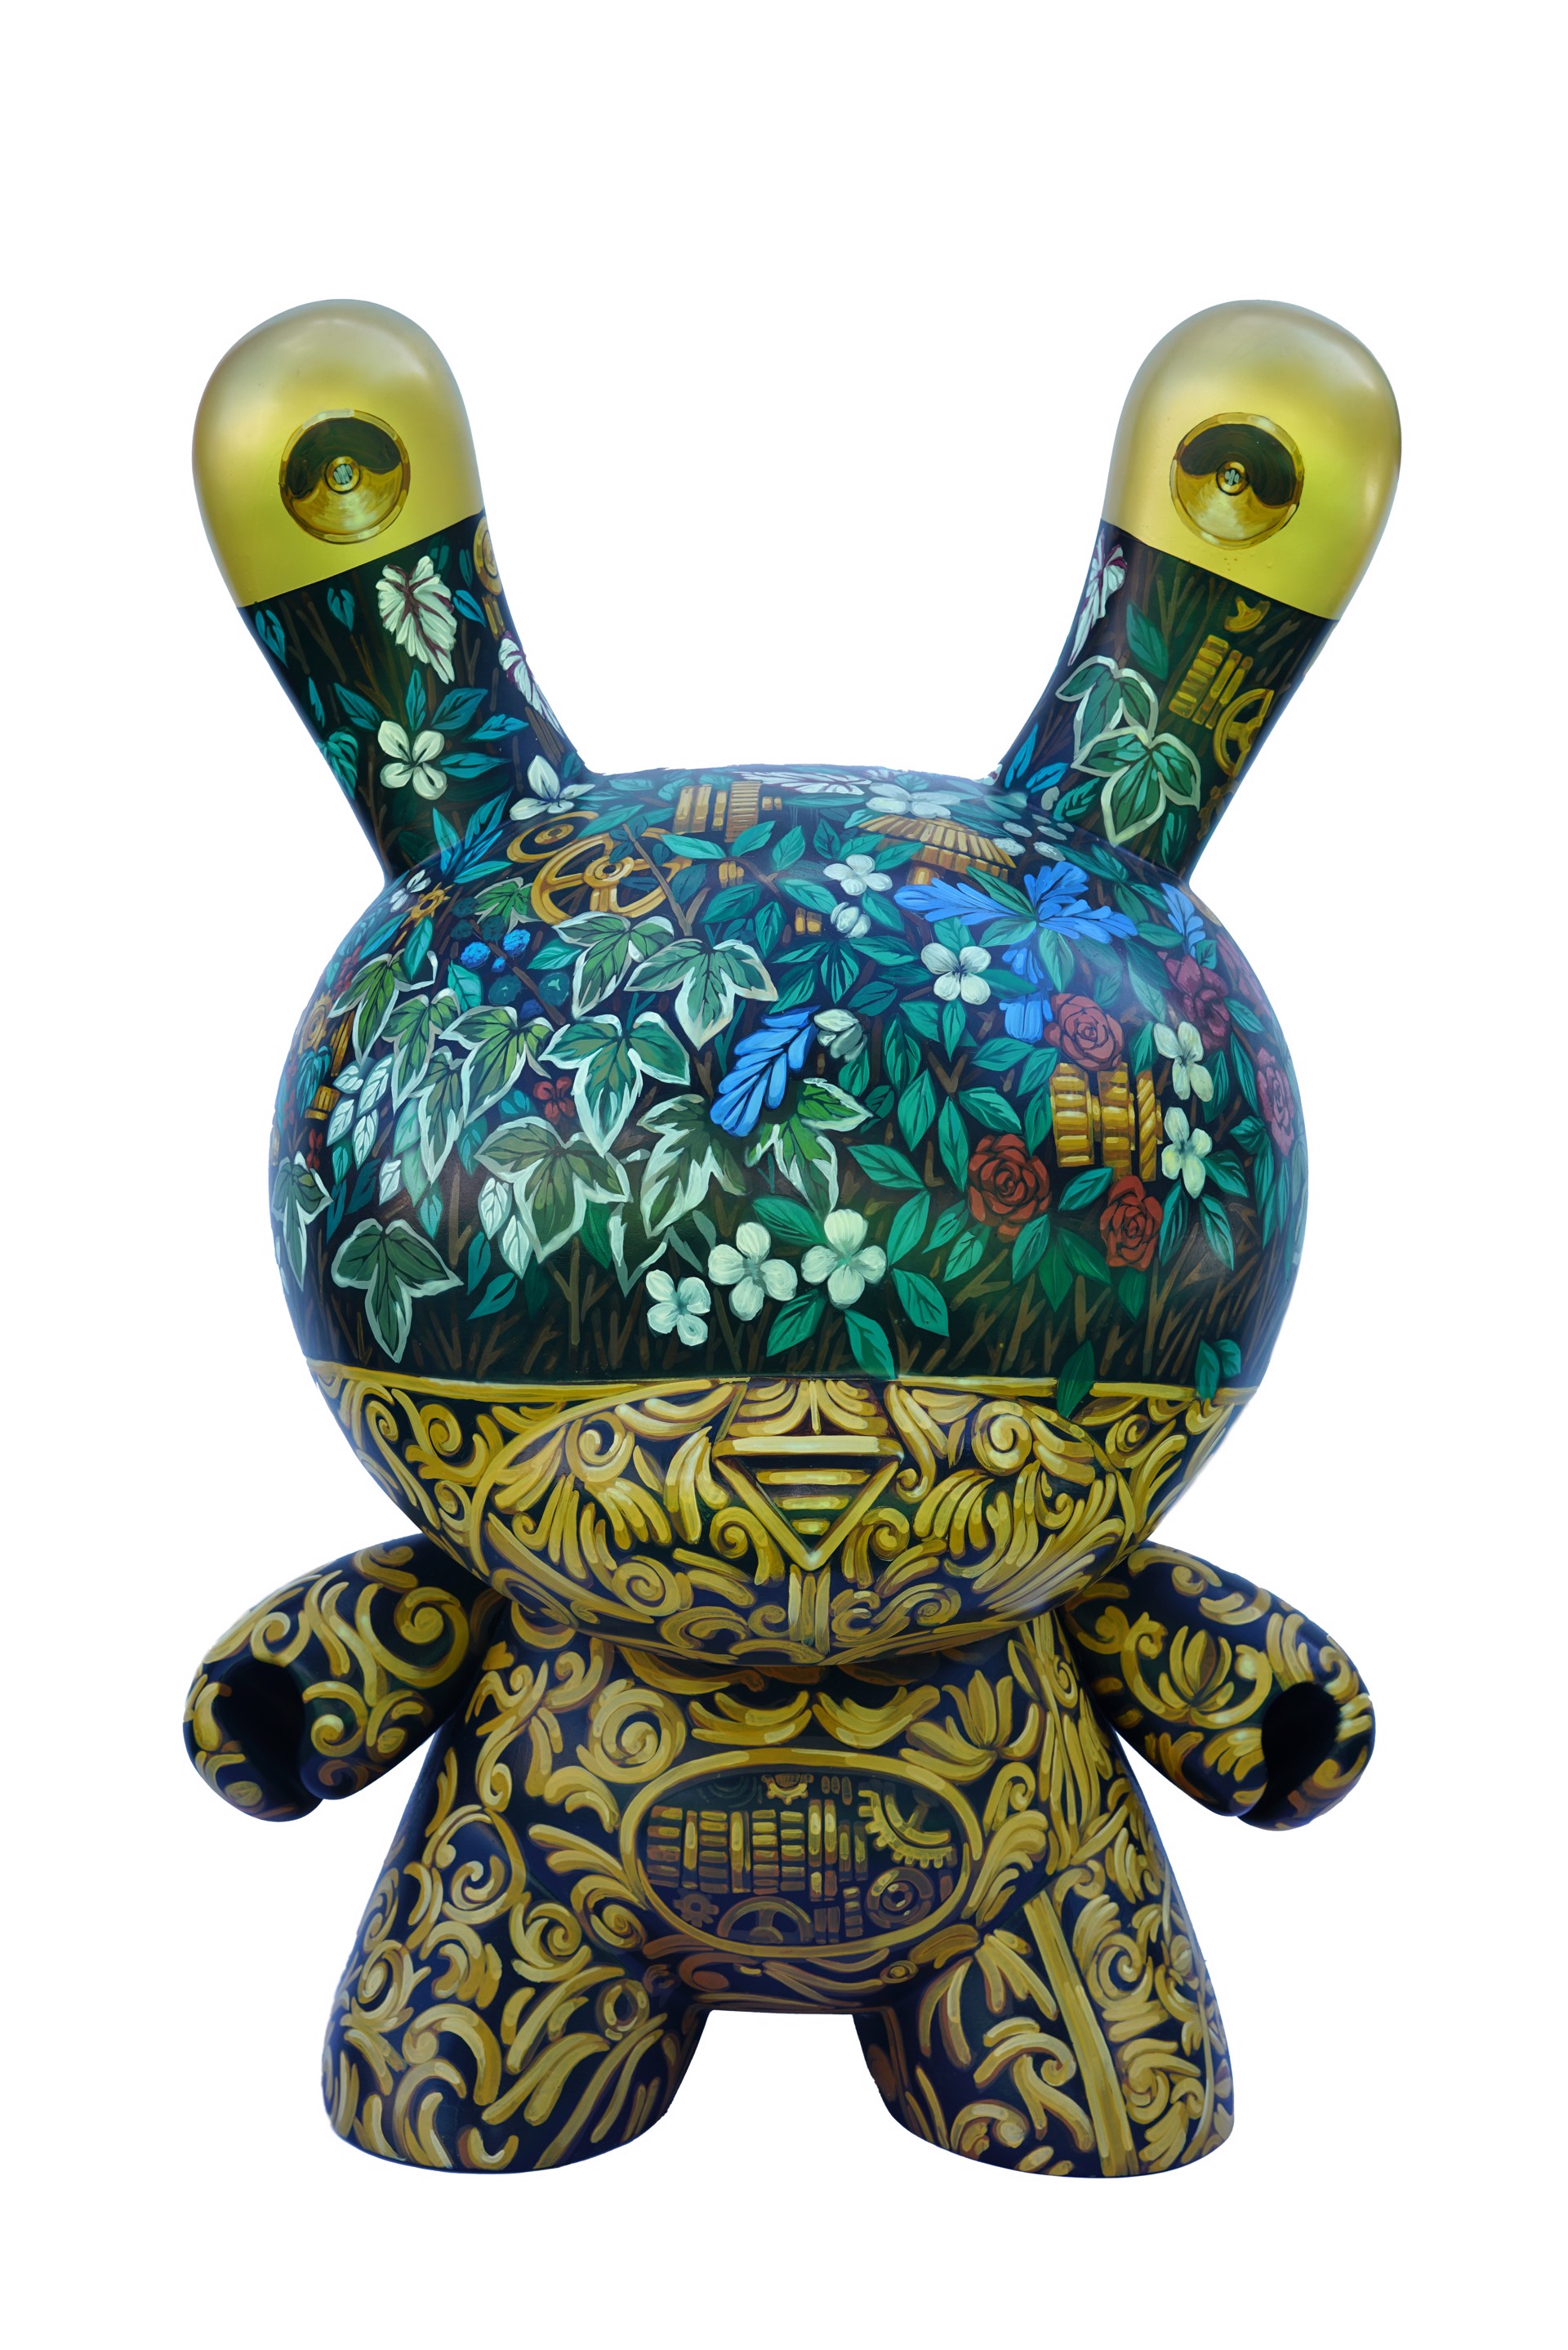 Hand Painted Kidrobot x PixelPancho 4' Dunny by PixelPancho